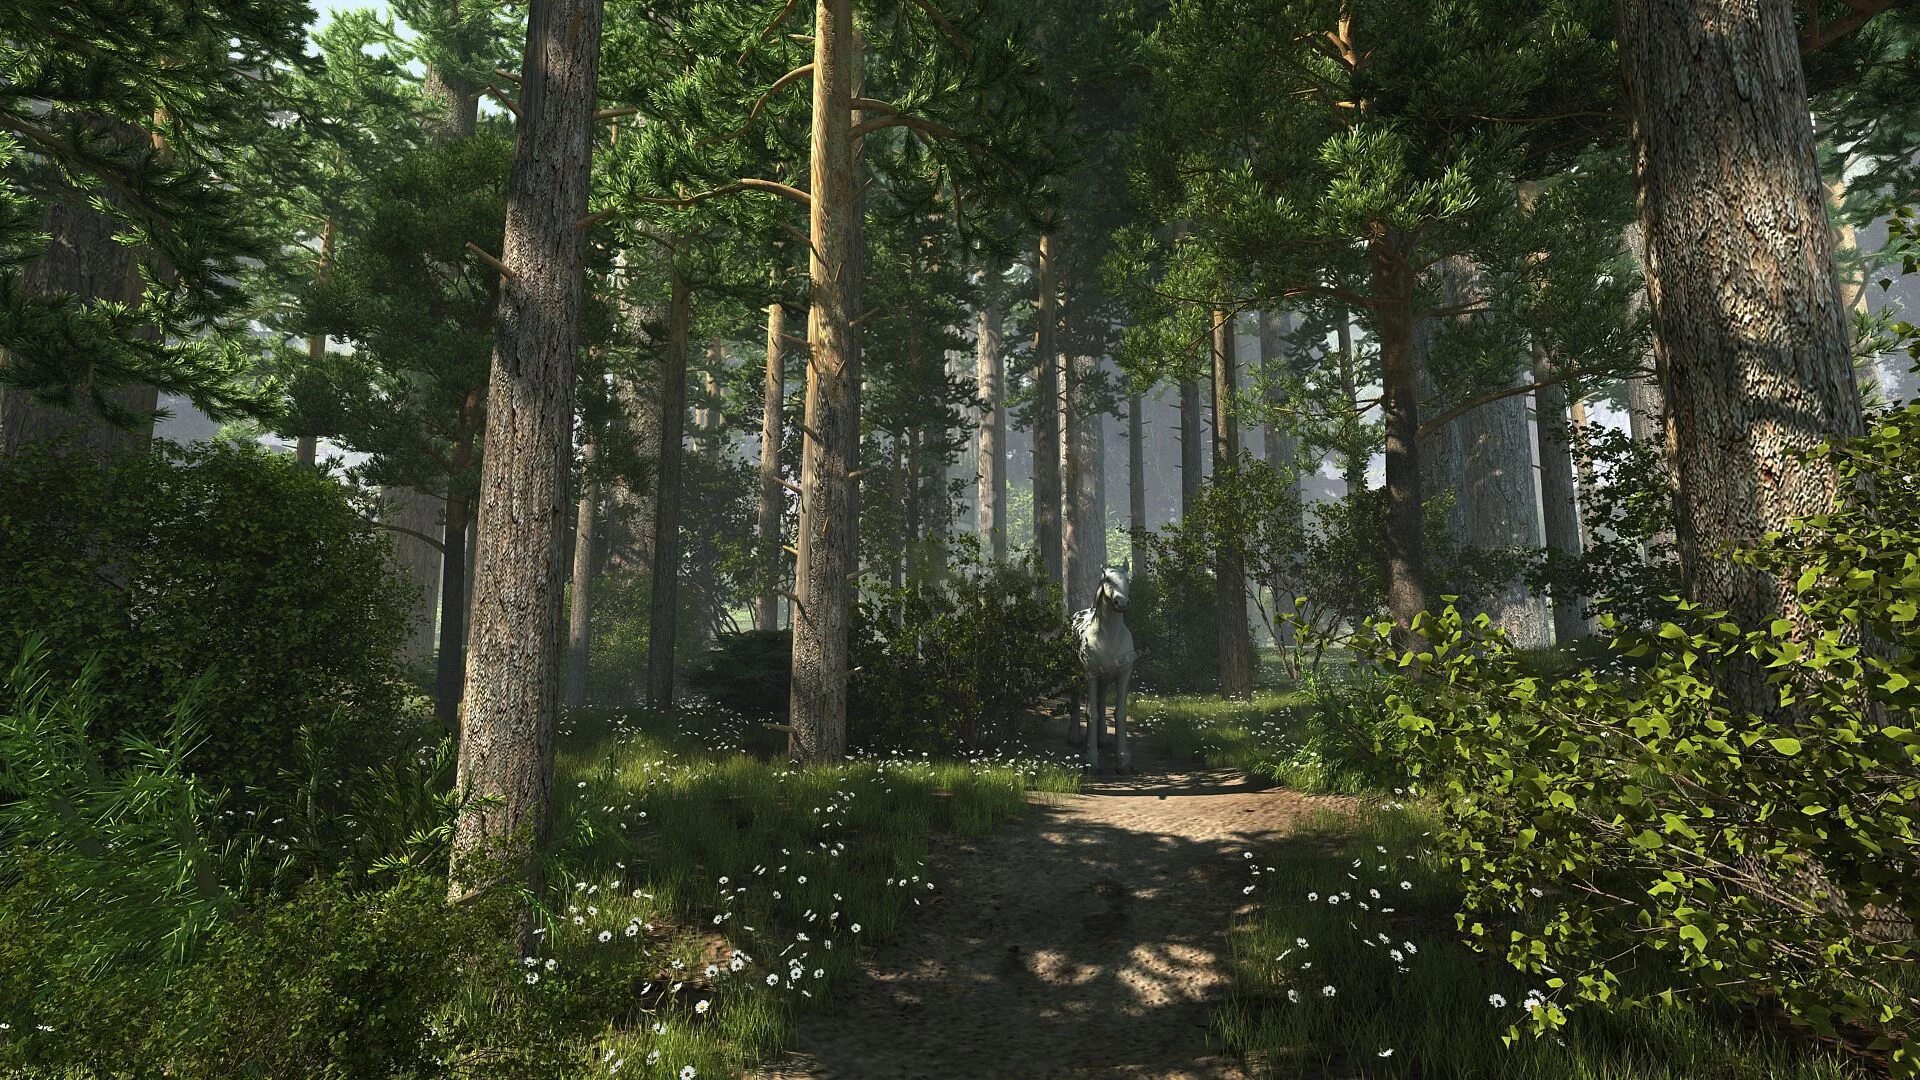 Forest 3ds Max. Форест 3. Мод Форест 3. Лес для 3д Макс. Лес 3 действия